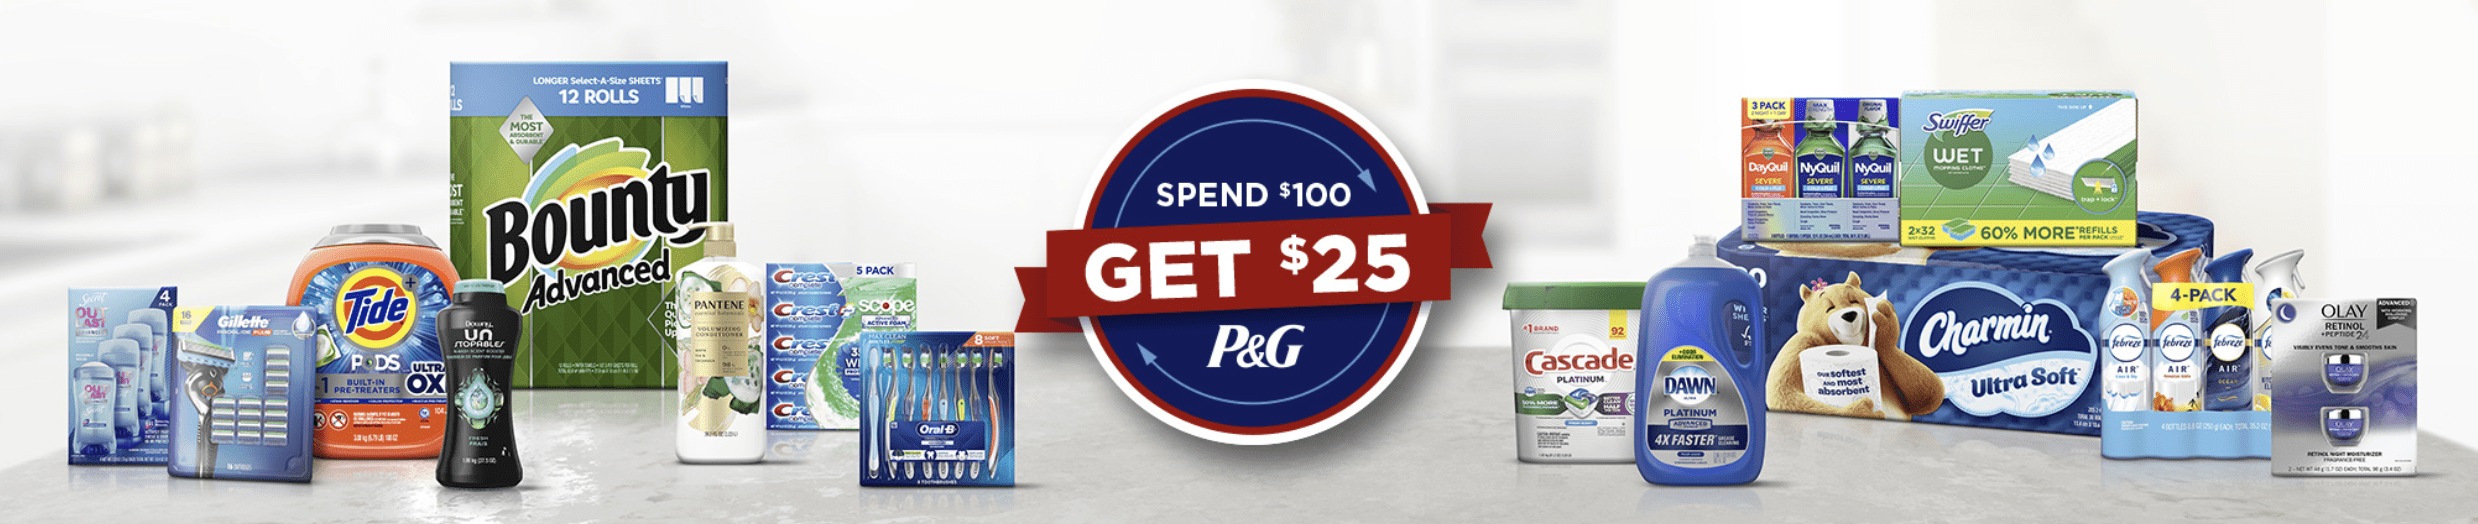 Costco P&G Rebate Promotion 2022 Buy 100 of Select P&G Products and